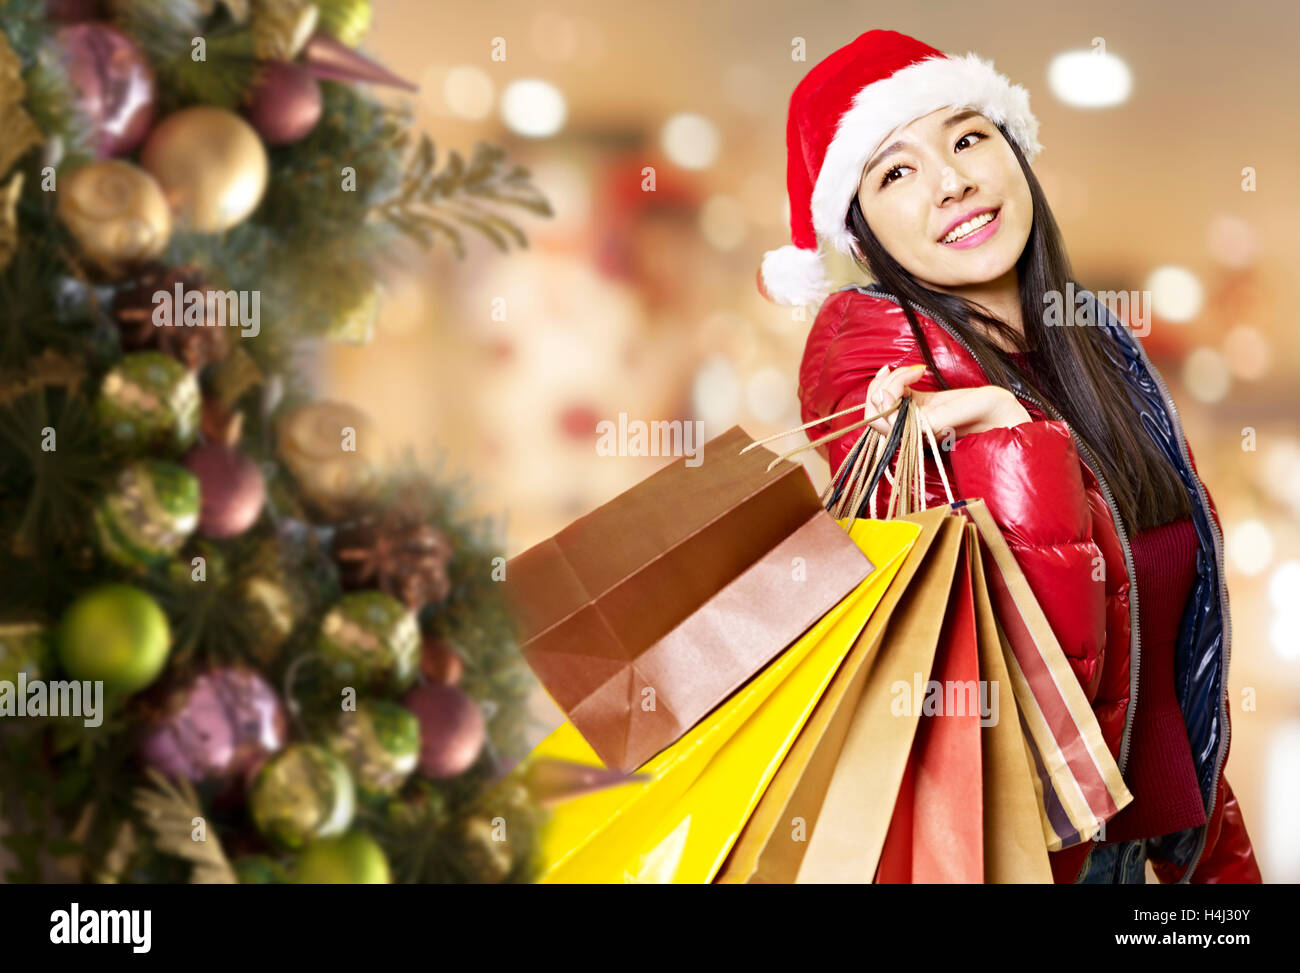 young asian woman carrying paper bags on shoulder during christmas shopping, happy and smiling. Stock Photo